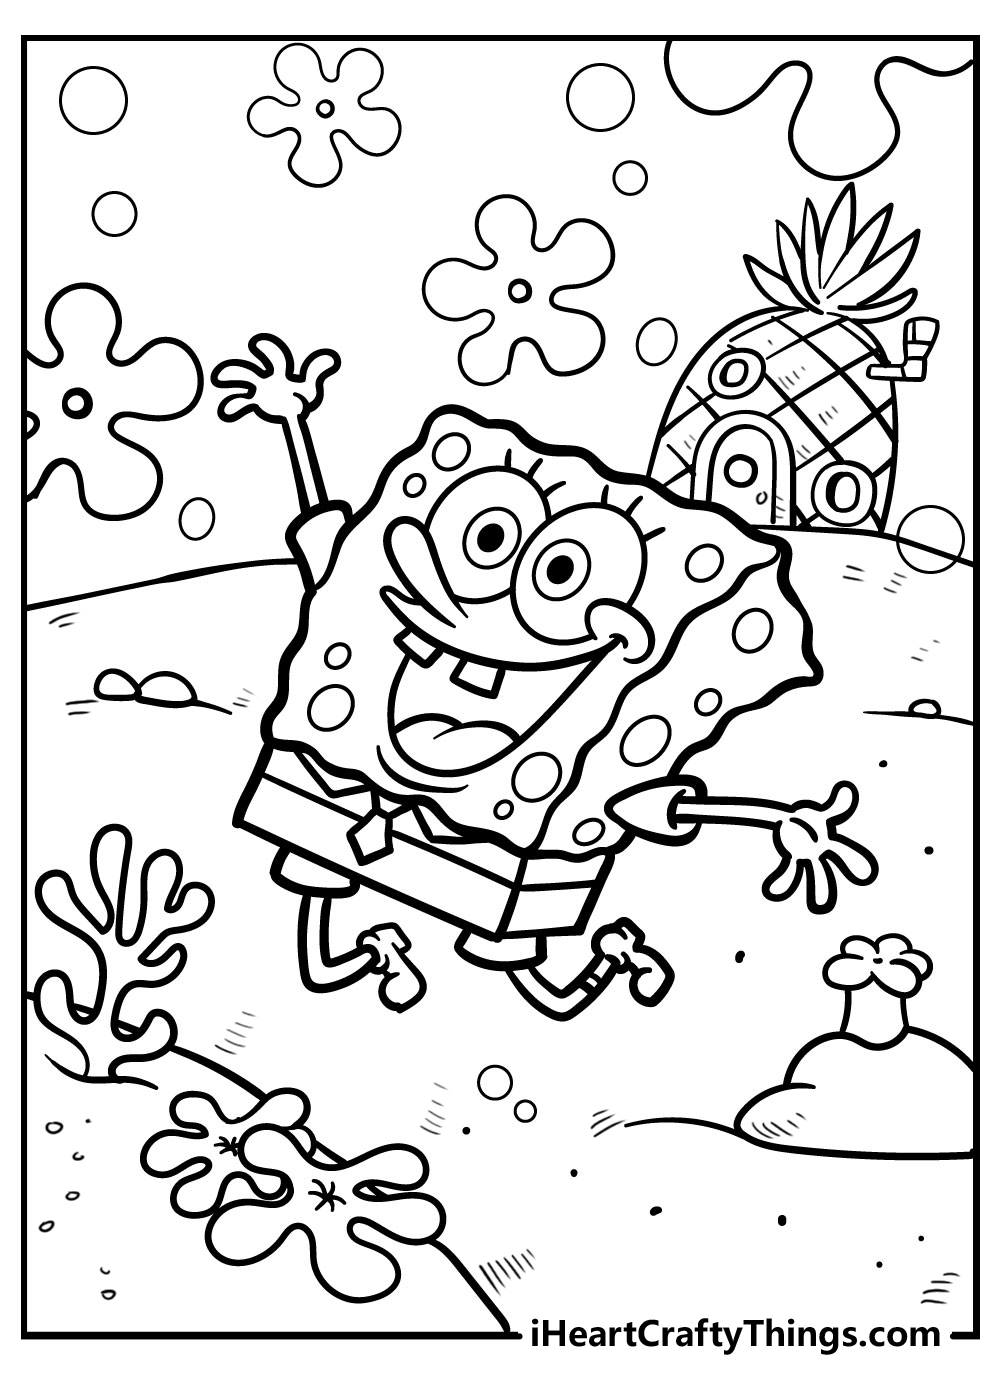 color me fun coloring pages